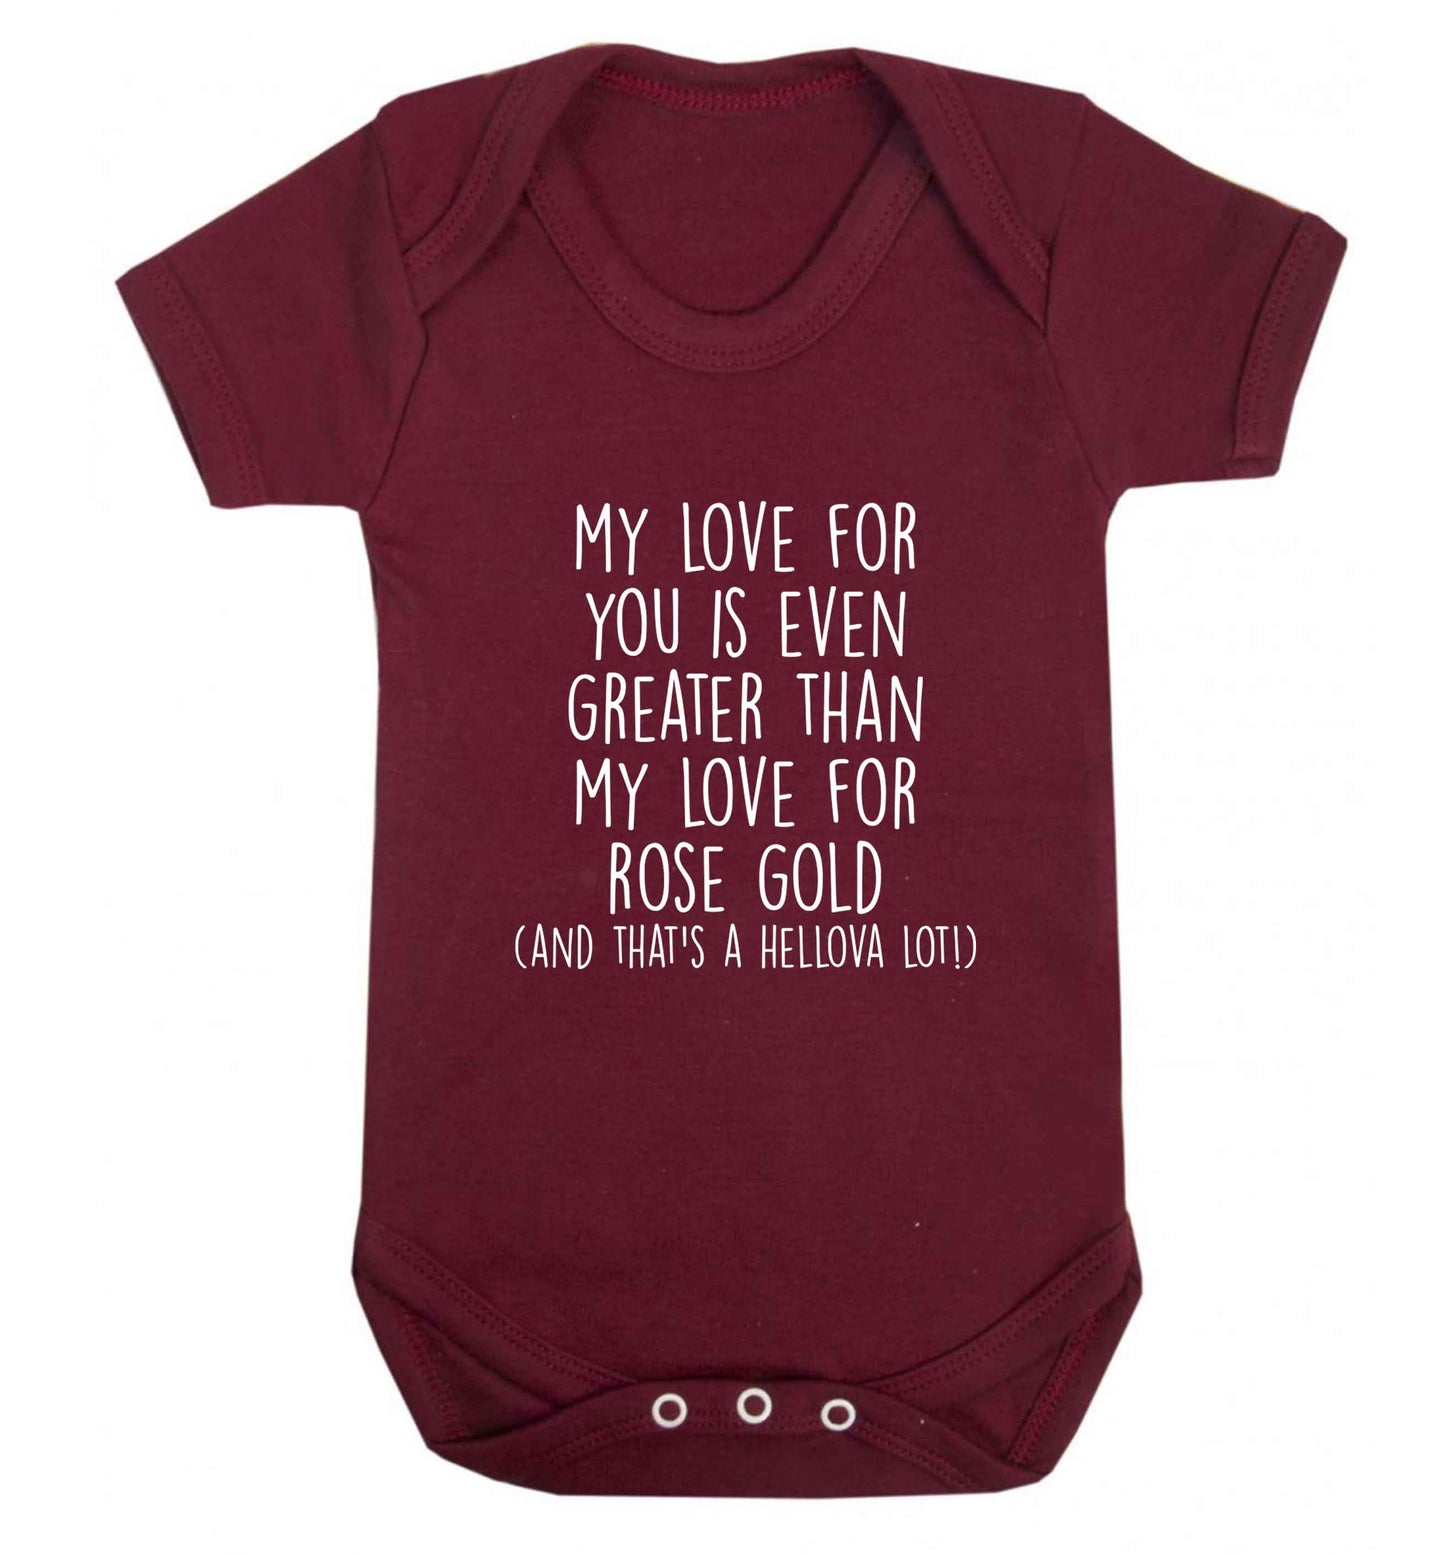 My love for you is even greater than my love for rose gold (and that's a hellova lot) baby vest maroon 18-24 months